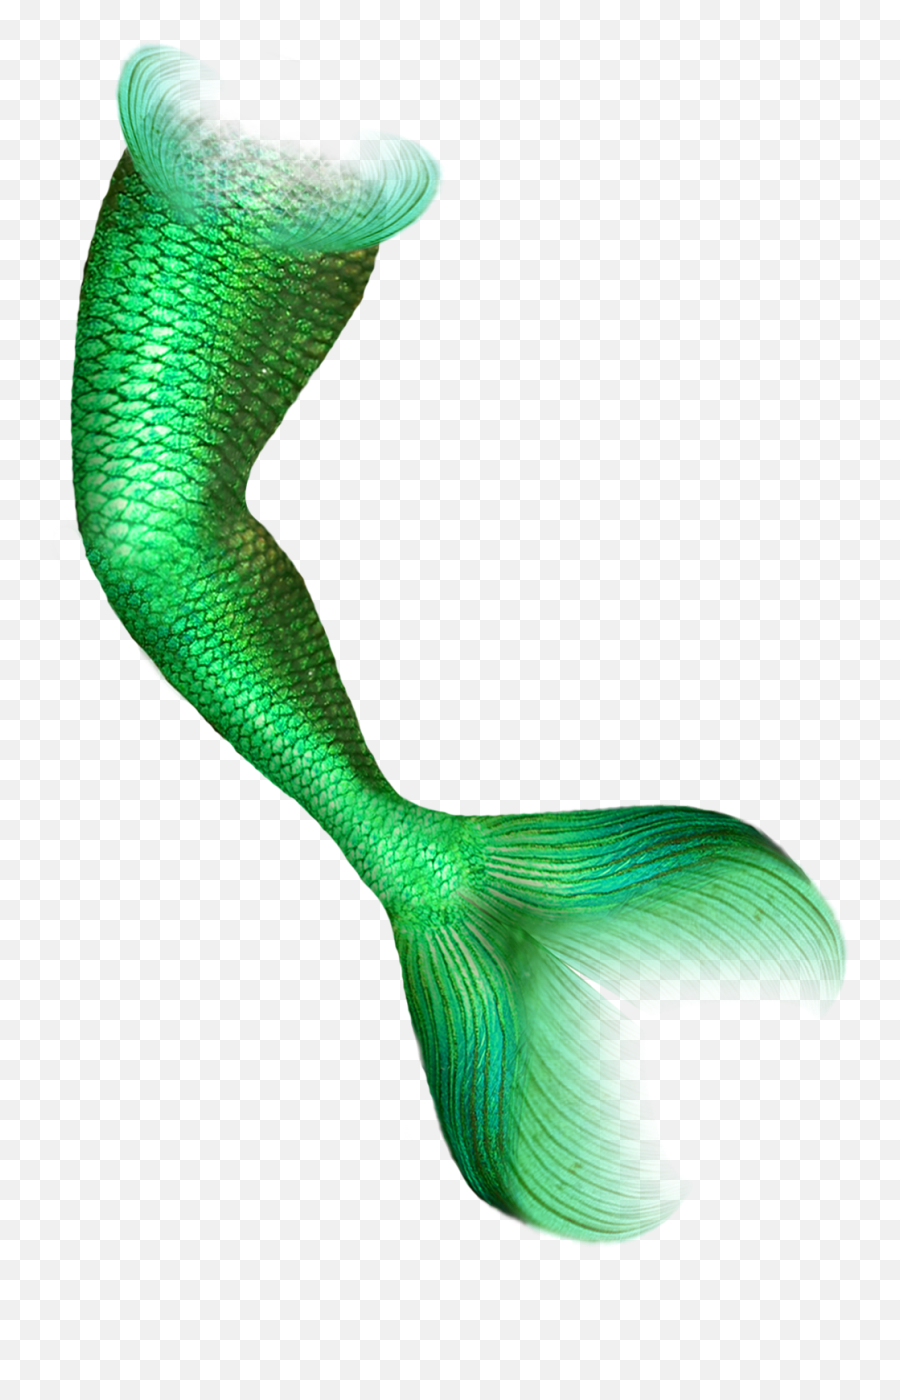 Mermaid Tail - Mermaid Tail Transparent Background Png,Mermaid Tails Png